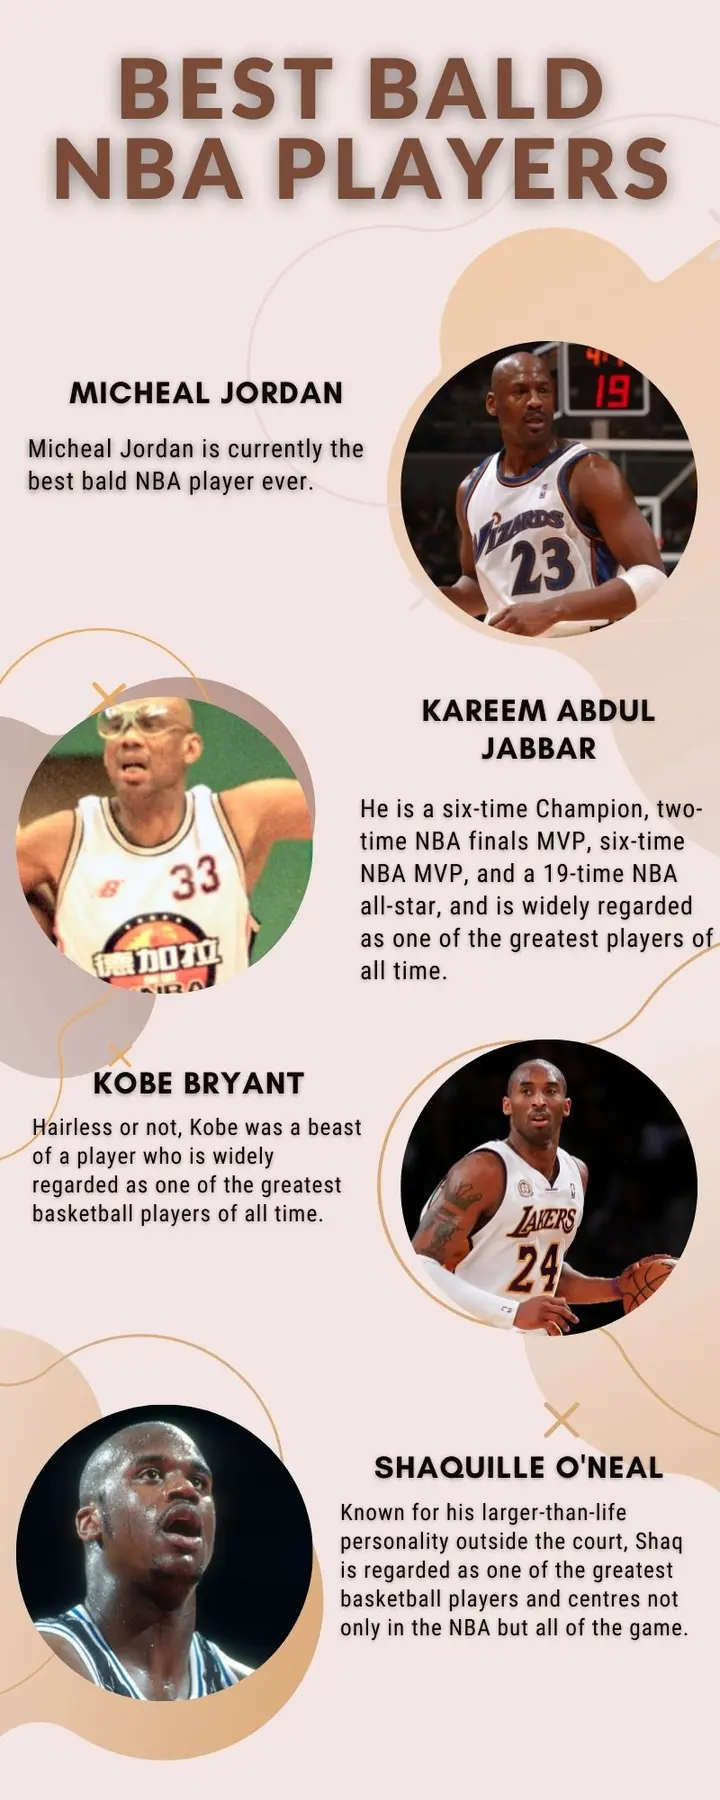 Best bald NBA players to ever play basketball